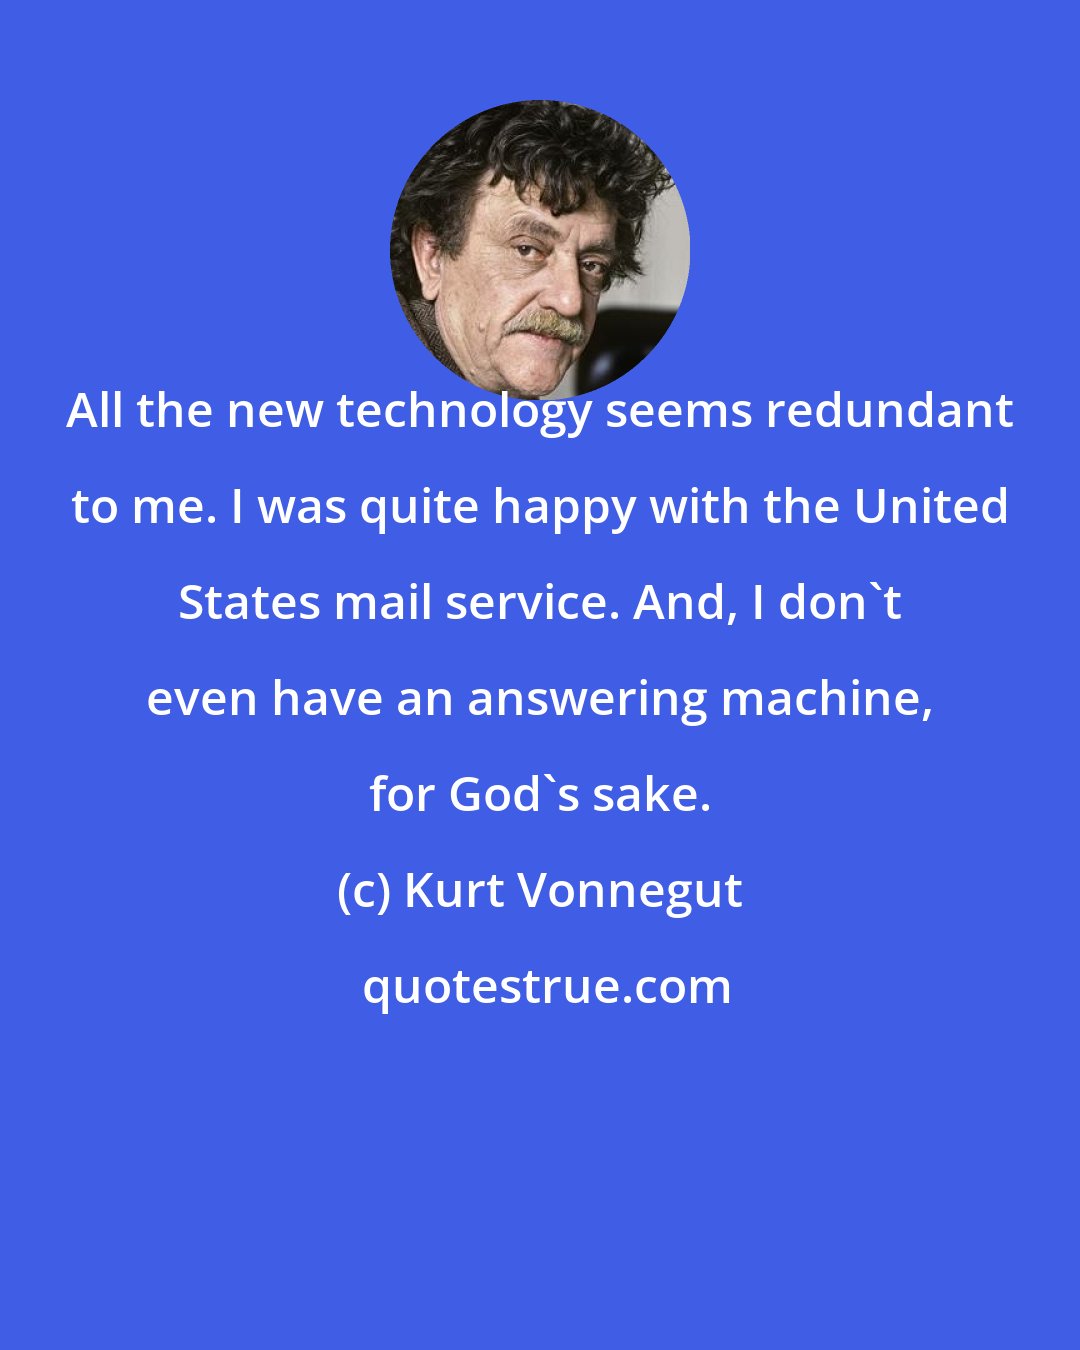 Kurt Vonnegut: All the new technology seems redundant to me. I was quite happy with the United States mail service. And, I don't even have an answering machine, for God's sake.